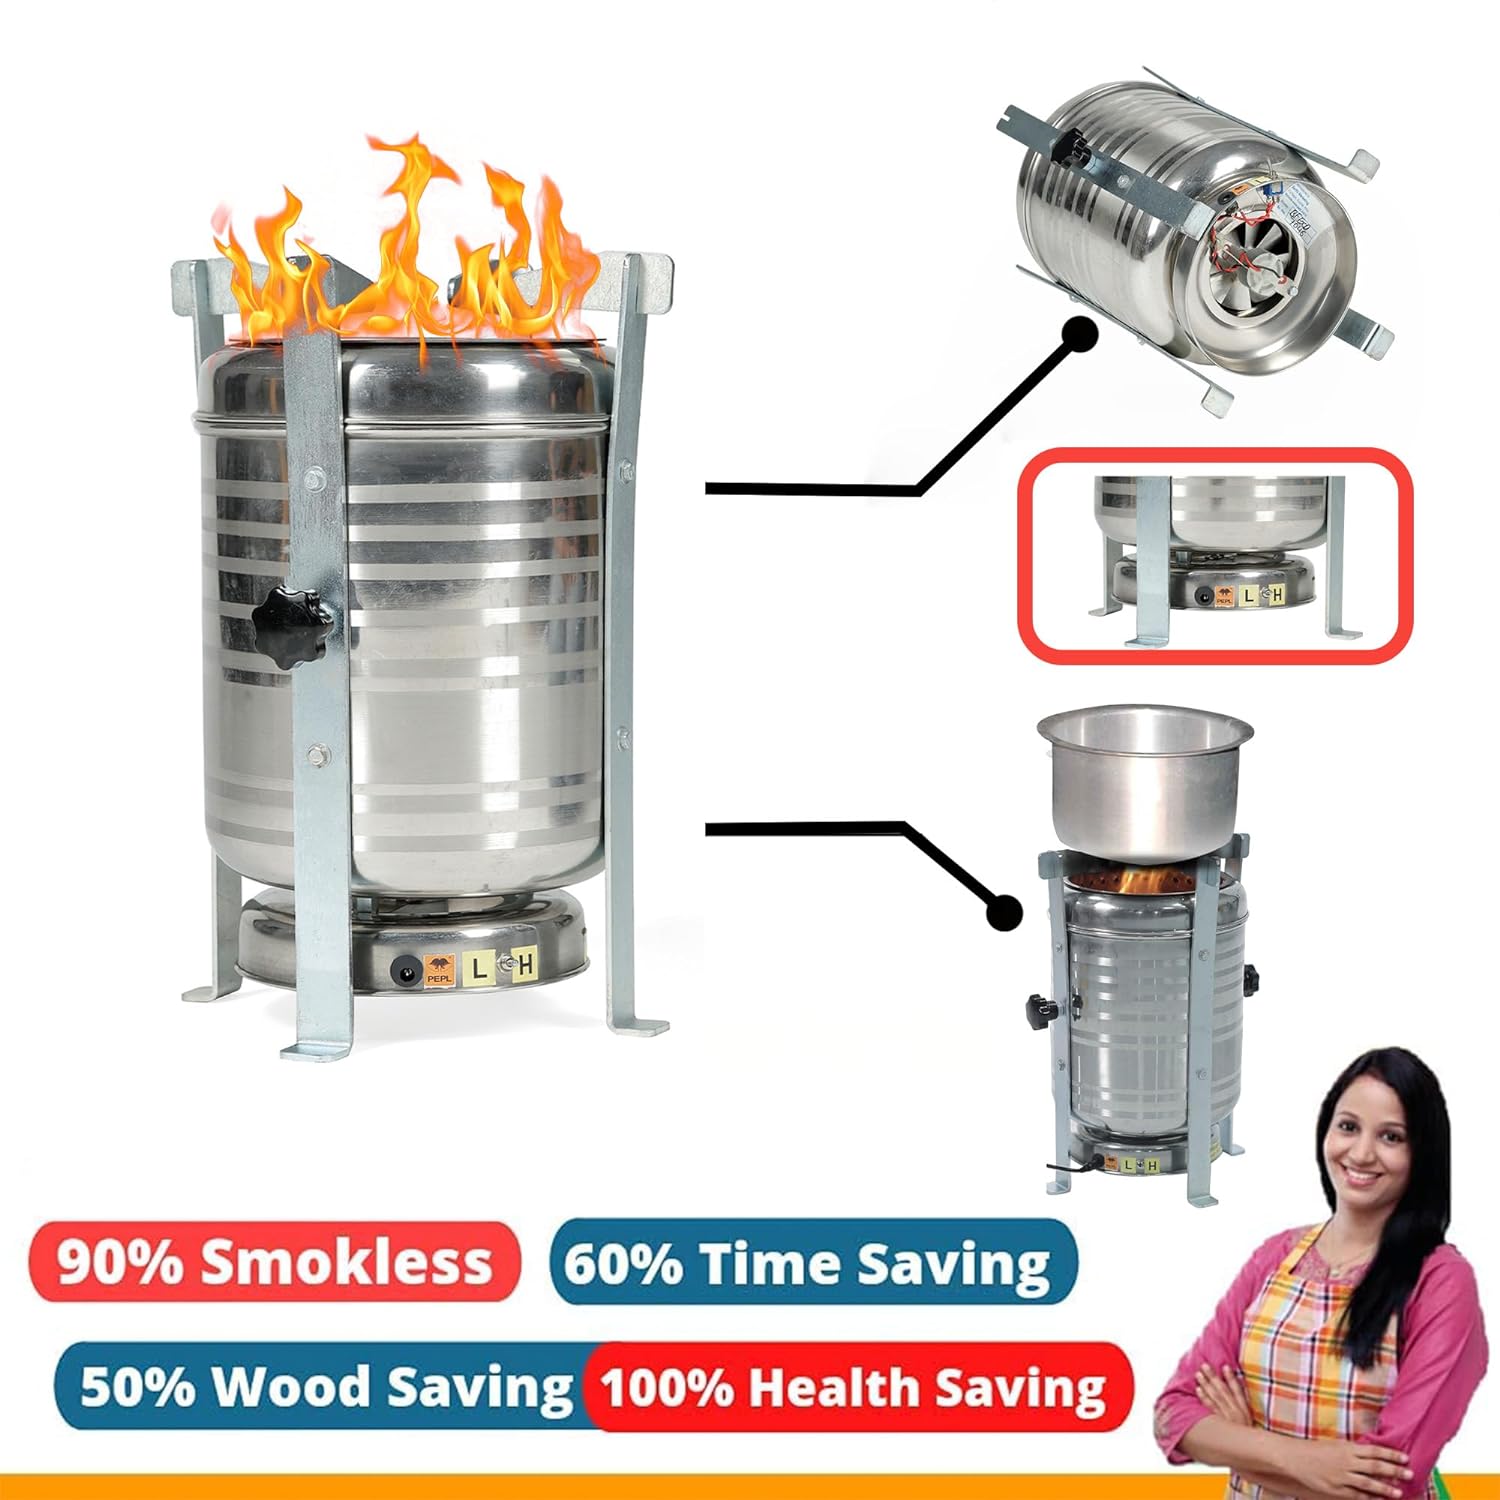 PEPL Biostove-Revolutionized Biomass Family Smokeless Cooking Stove-Chulha-Wood or Paper Waste Burning Backpacking stove for Indoor and Outdoor cooking-Stumbit Kitchen